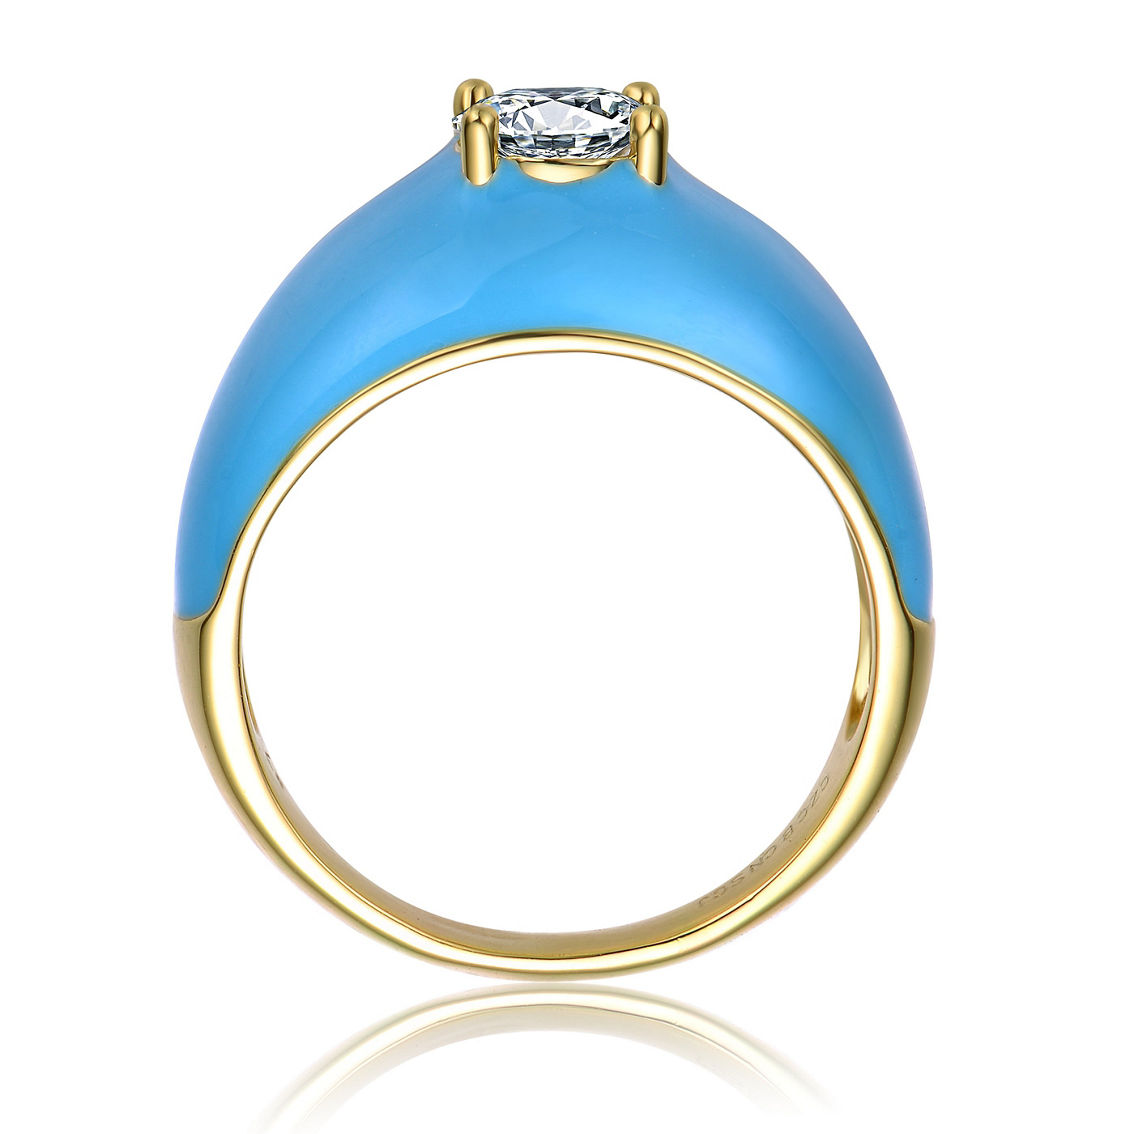 Young Adults/Teens 14k Yellow Gold Plated with CZ Solitaire Blue Enamel Dome Ring - Image 2 of 3